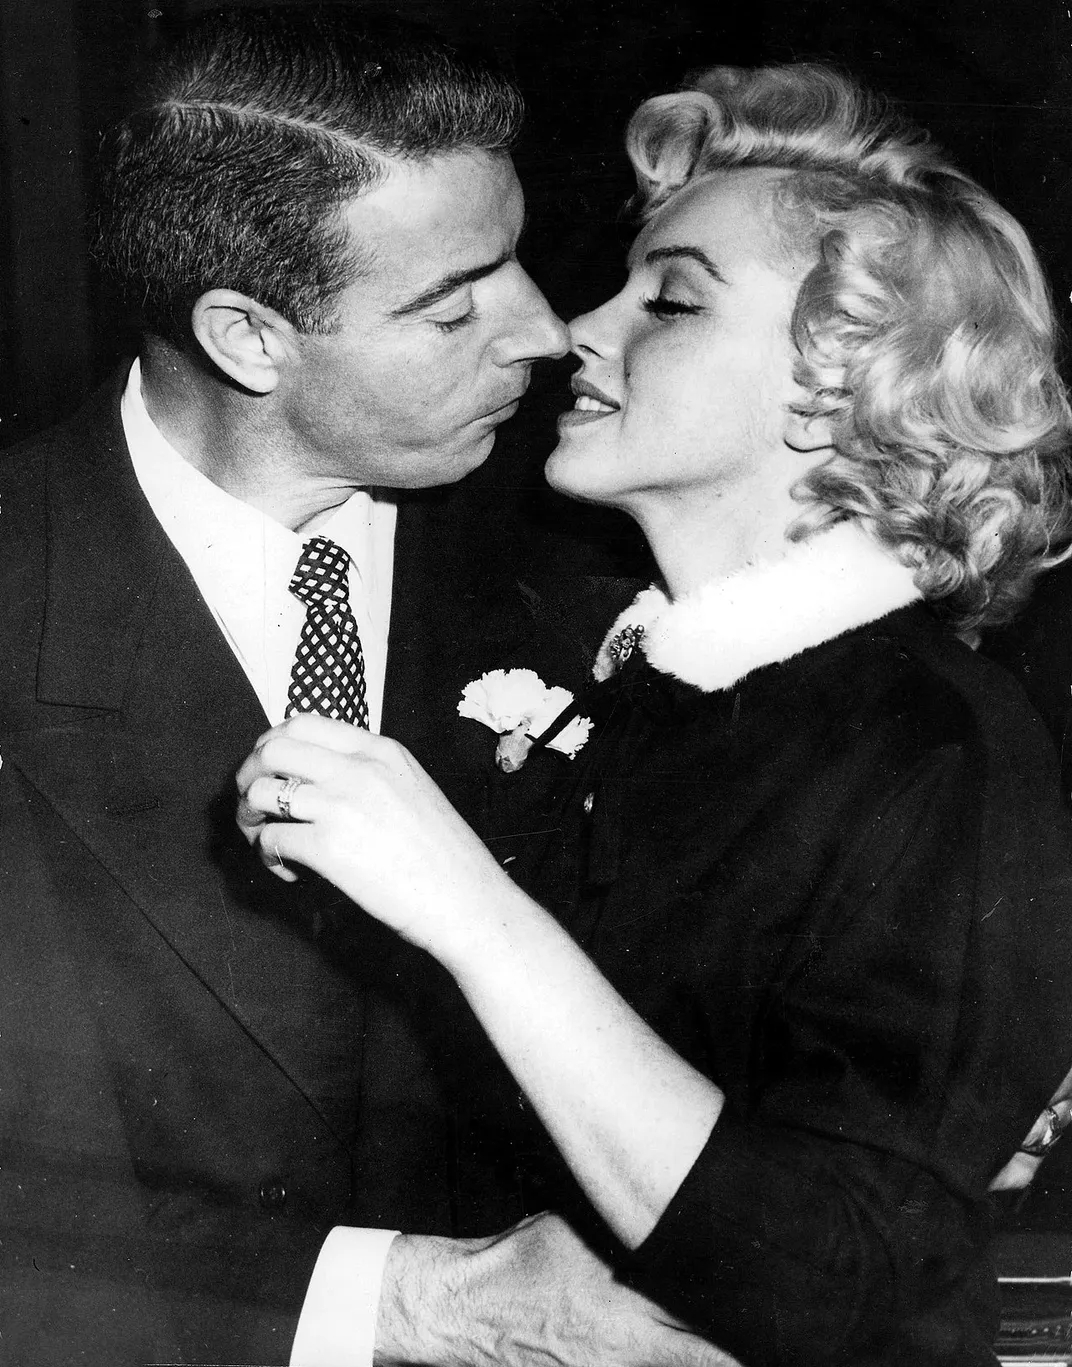 Monroe and her second husband, Joe DiMaggio, after getting married in January 1954